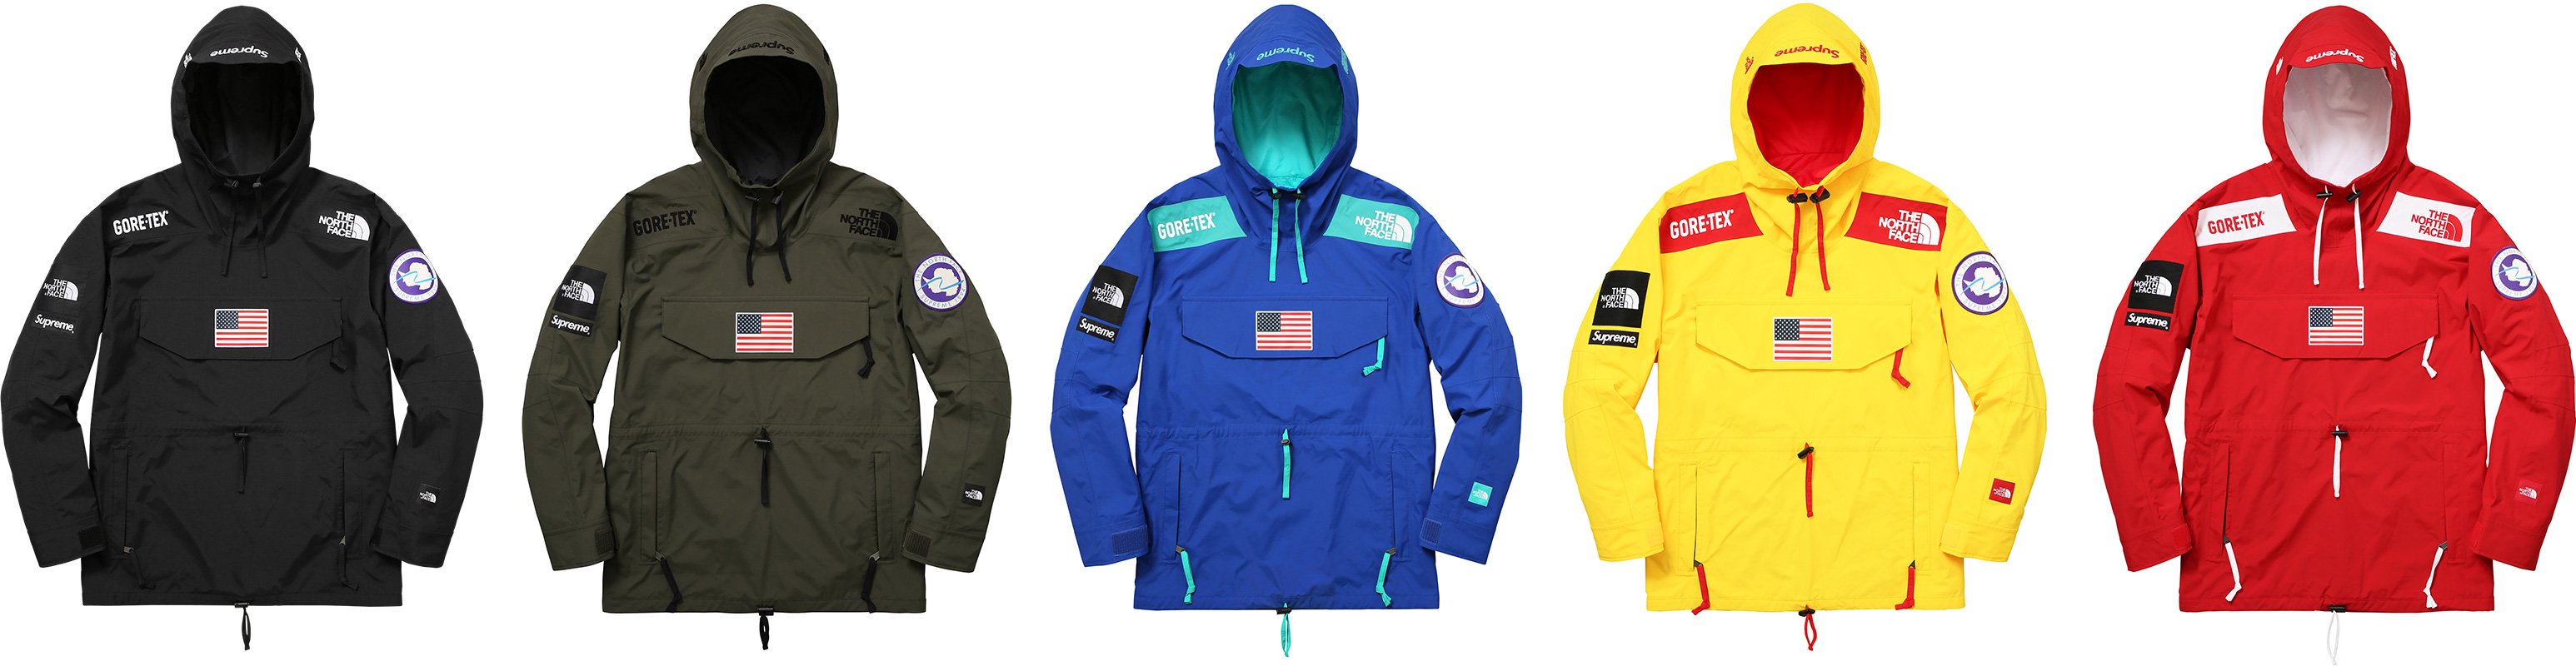 Supreme Archive TNF Expedition Pullovers